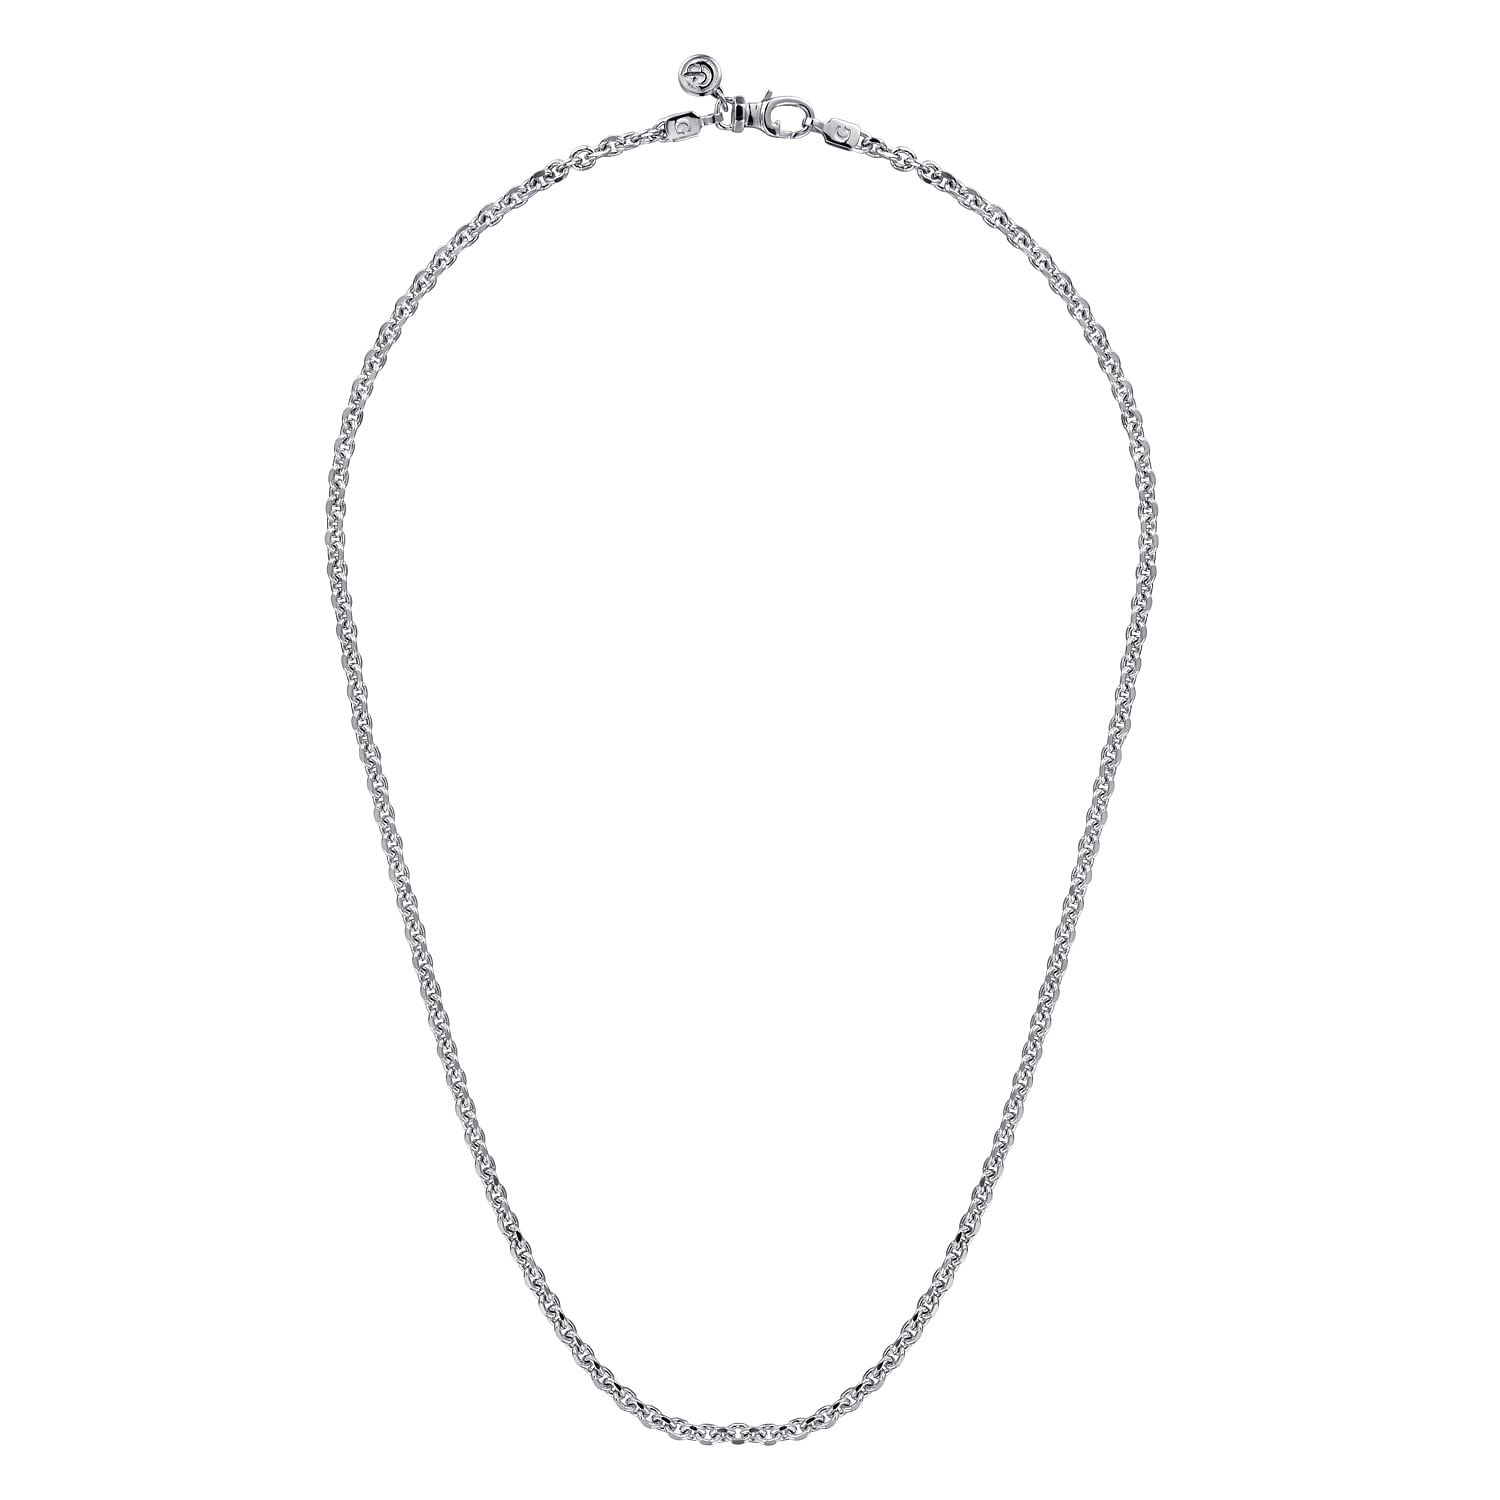 20 Inch 14K White Gold Men's Link Chain Necklace